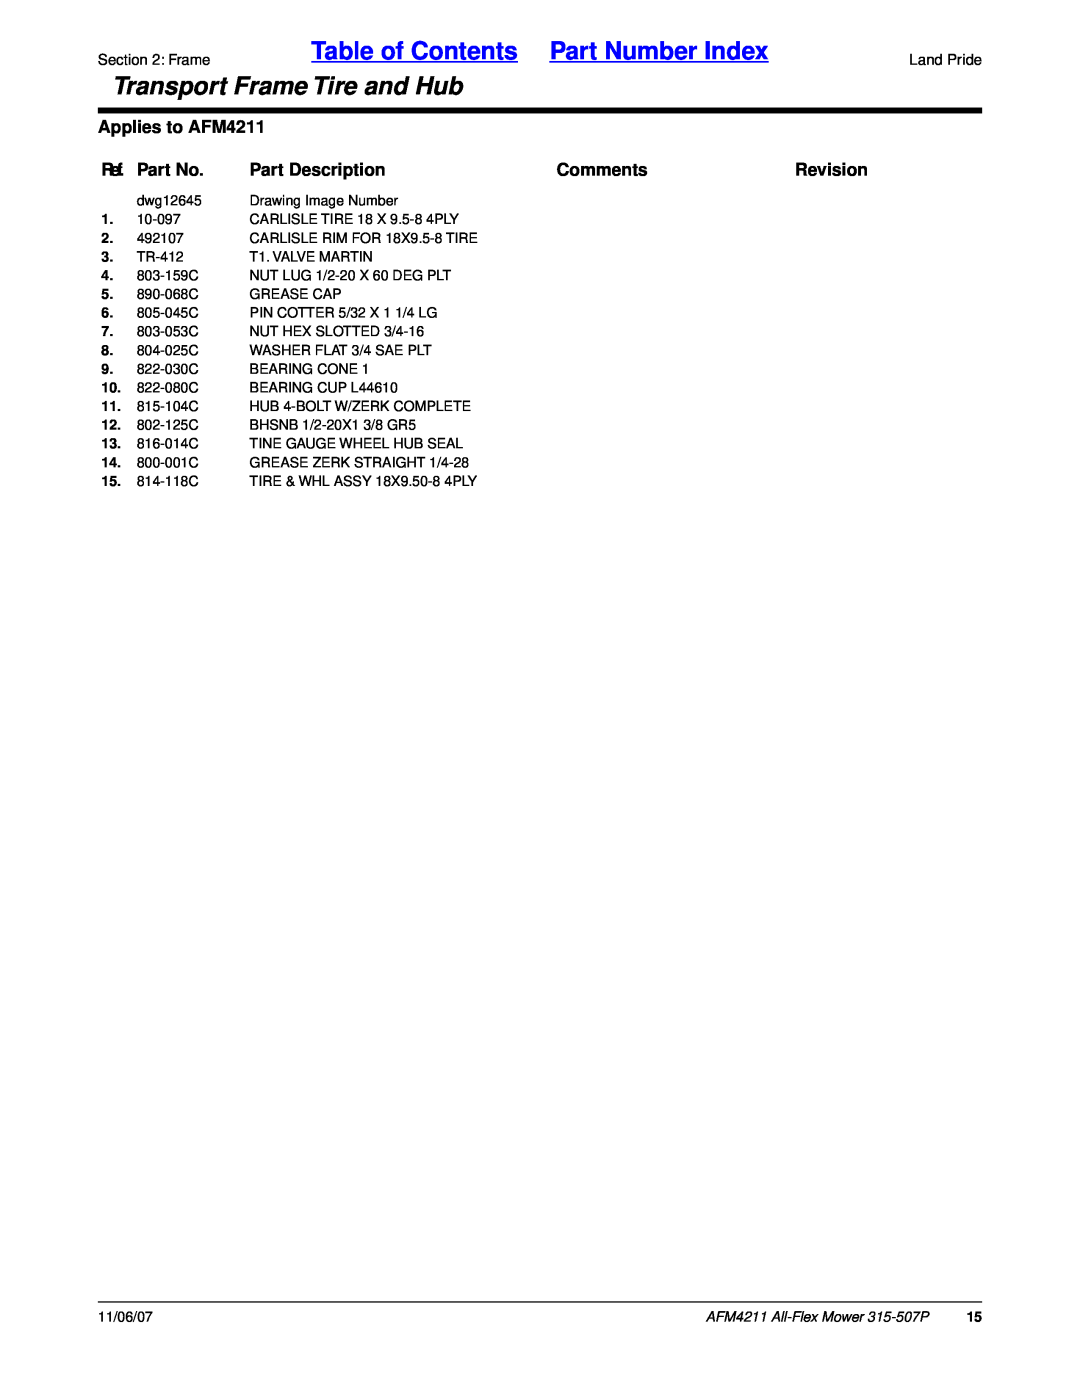 Land Pride All-Flex Mower Table of Contents Part Number Index, Transport Frame Tire and Hub, Applies to AFM4211, Comments 